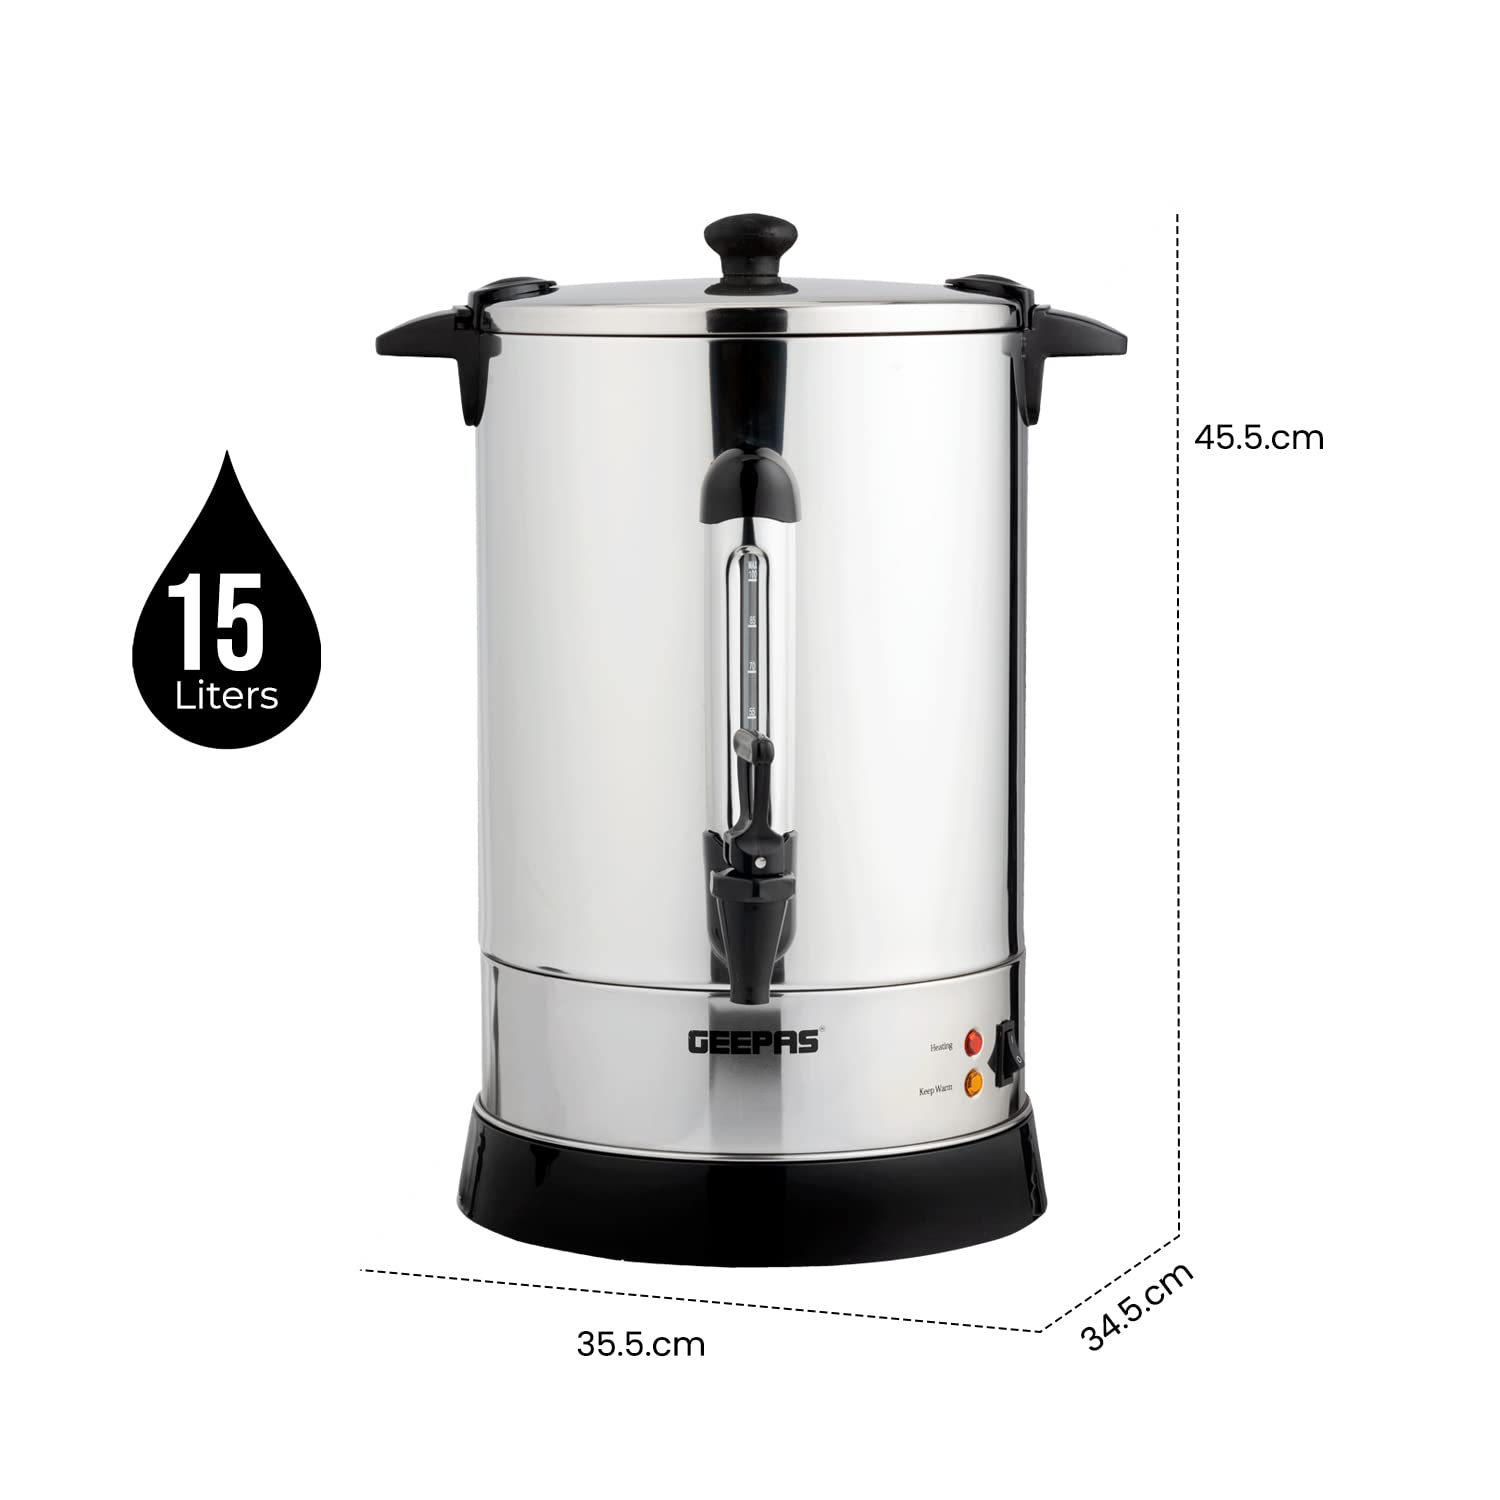 Geepas S/S WATER BOILER Kettle 1650W - Stainless Steel Hot Water Dispenser With Automatic Temperature Control & Keep Warm Function - 15L ,Silver/Black GK5219